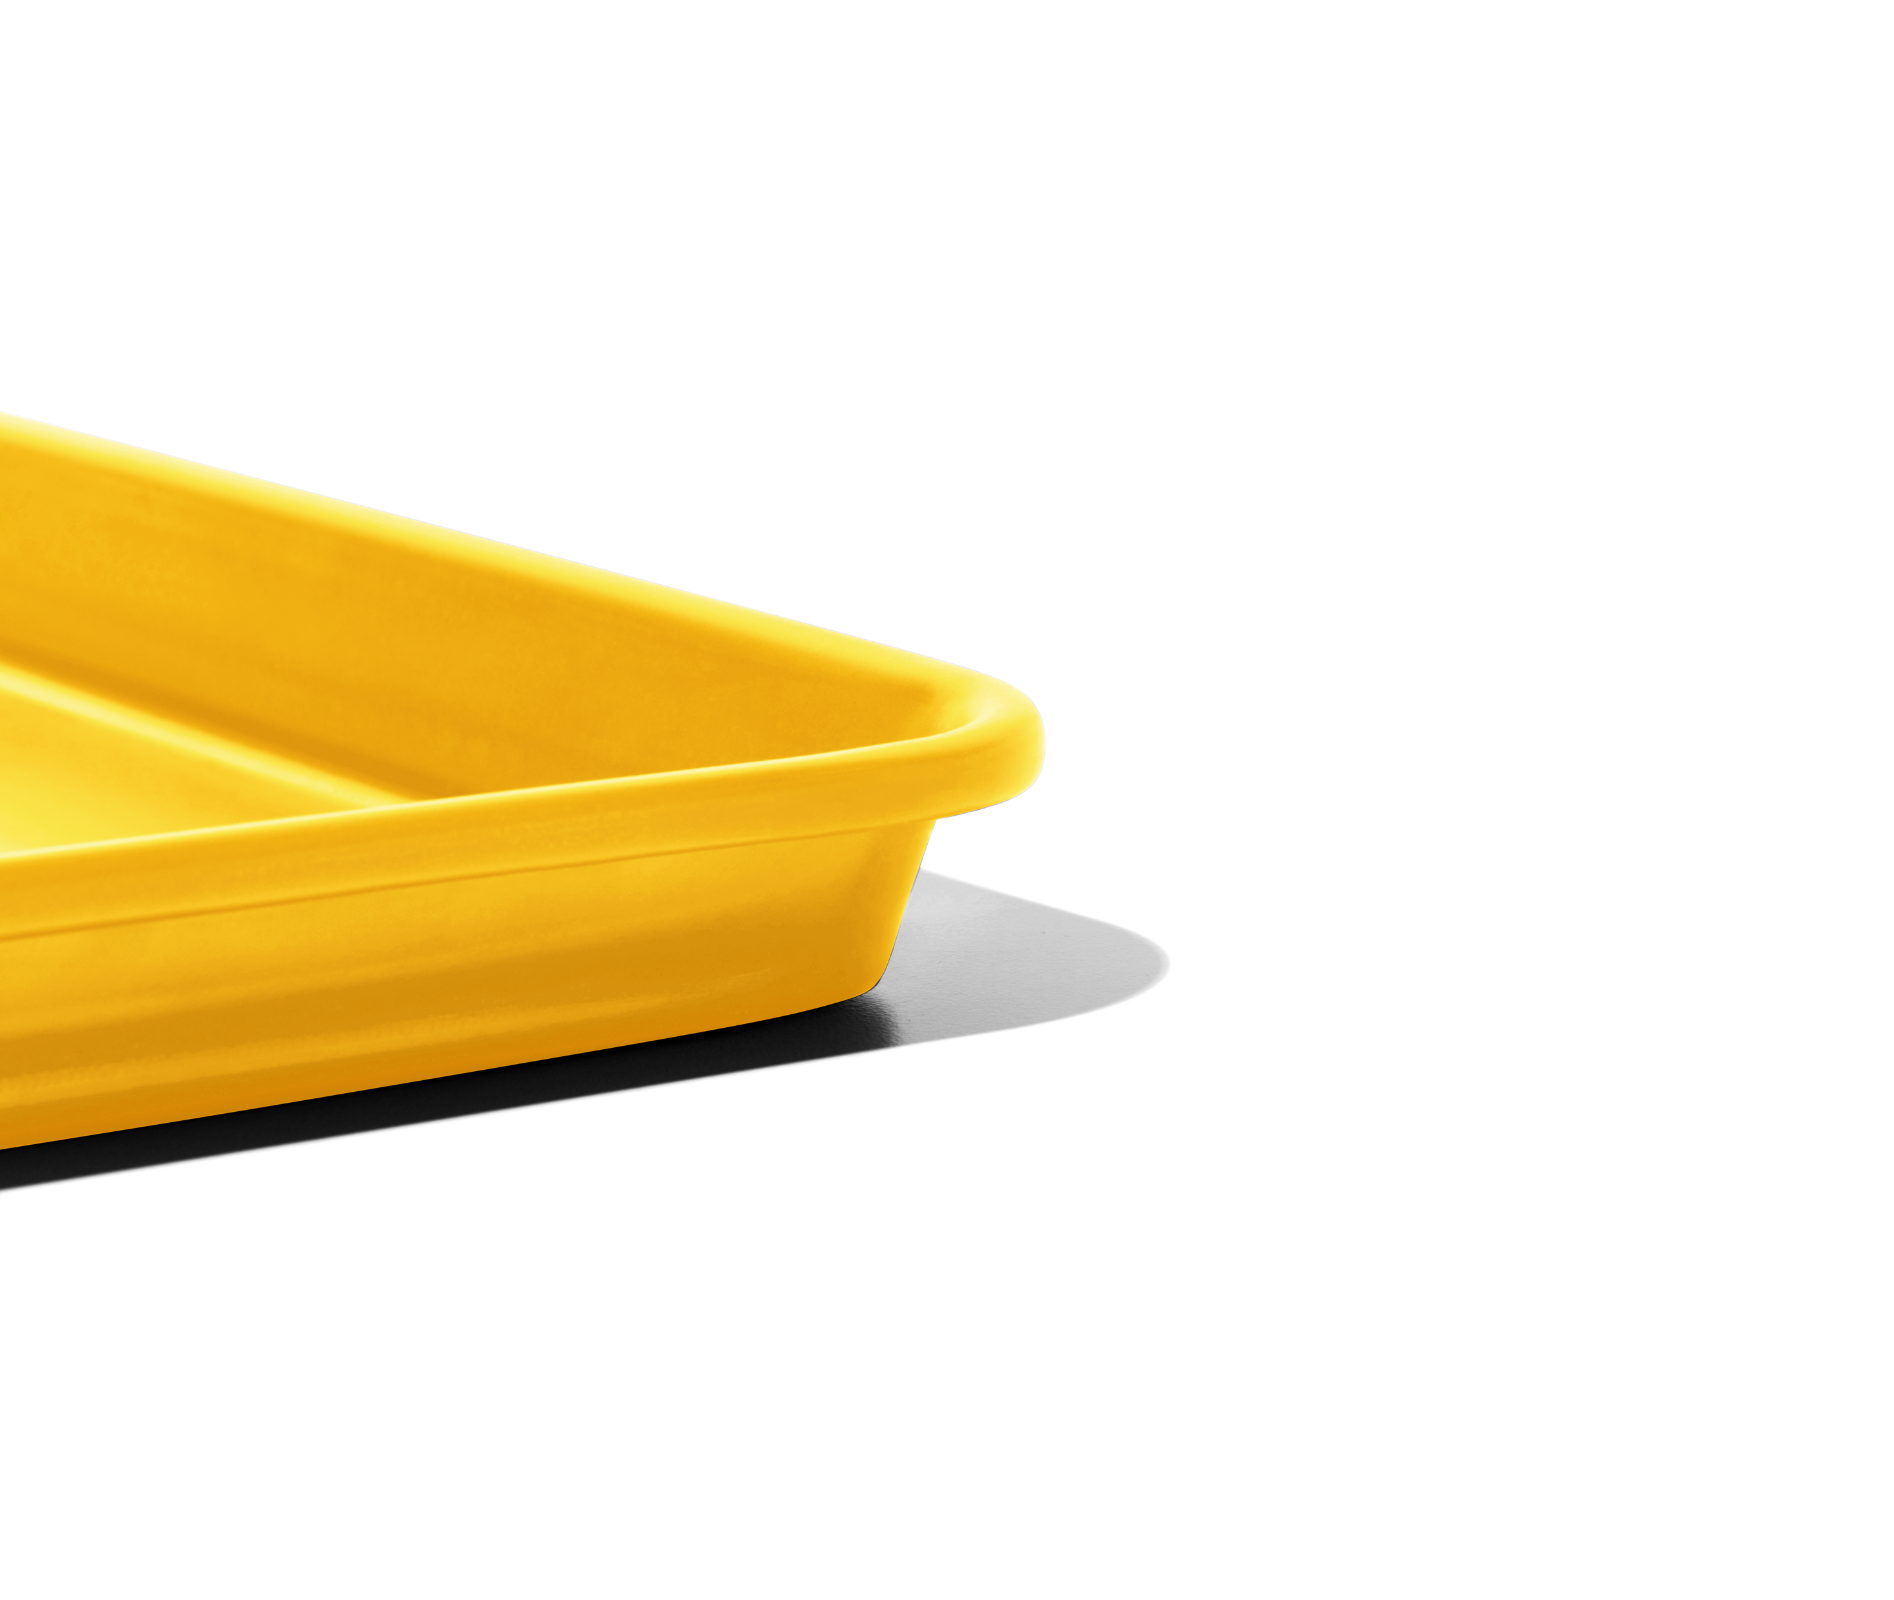 Holy Sheet pan in mustard yellow is a rimmed half-sheet, the perfect size for home kitchens.